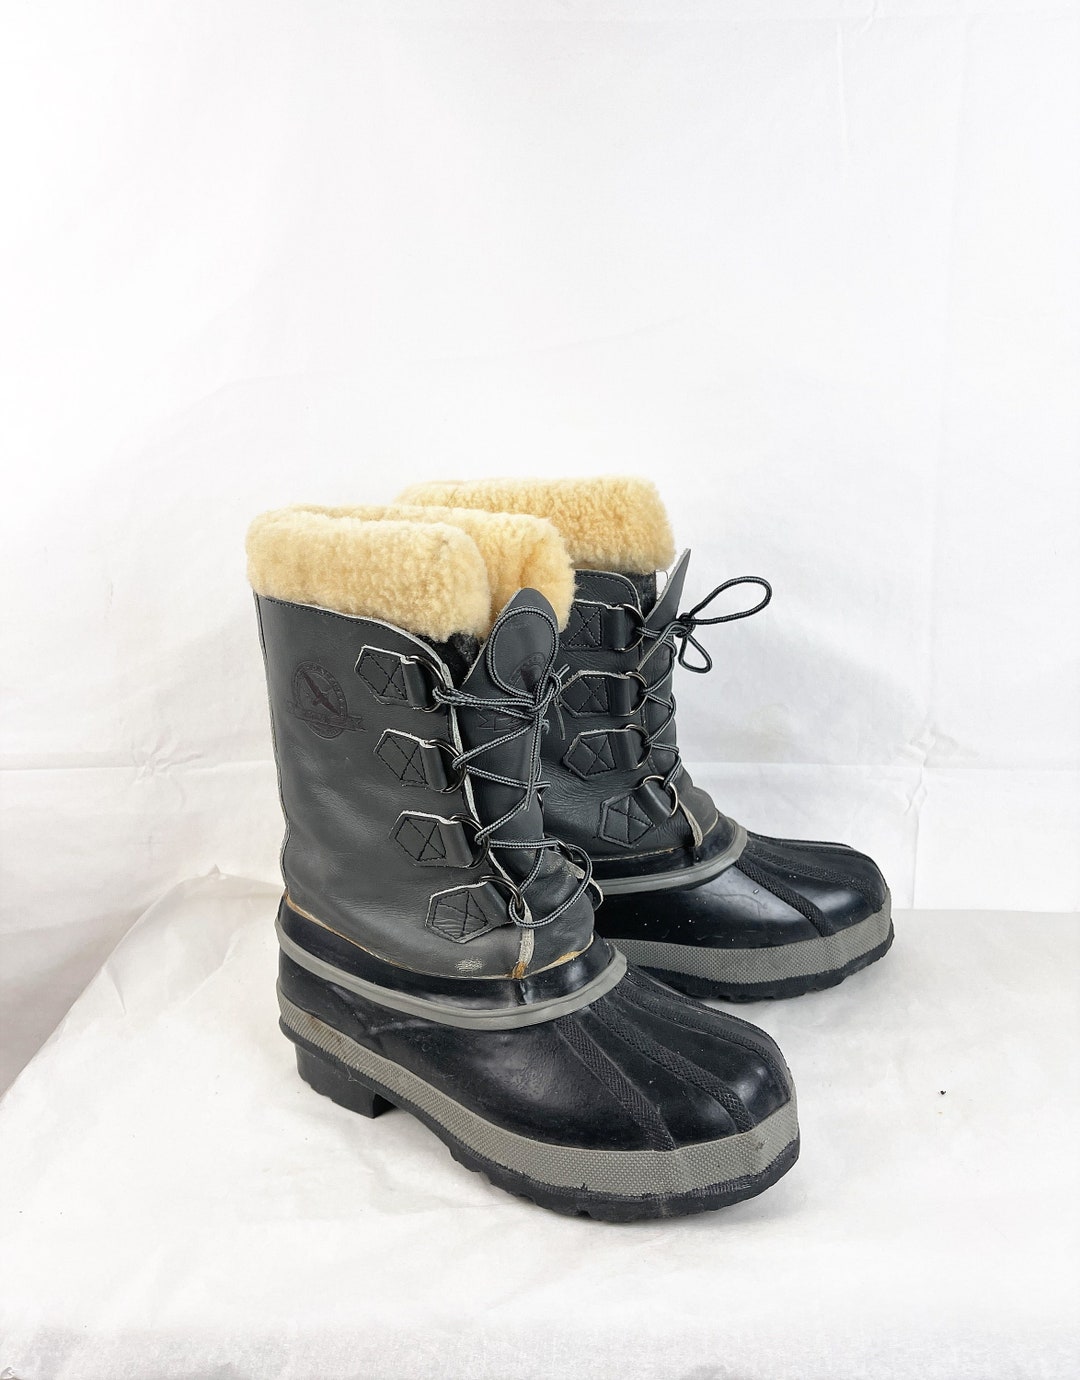 Vintage Eddie Bauer Tall Snow Boots Leather and Rubber Shearling Lining ...